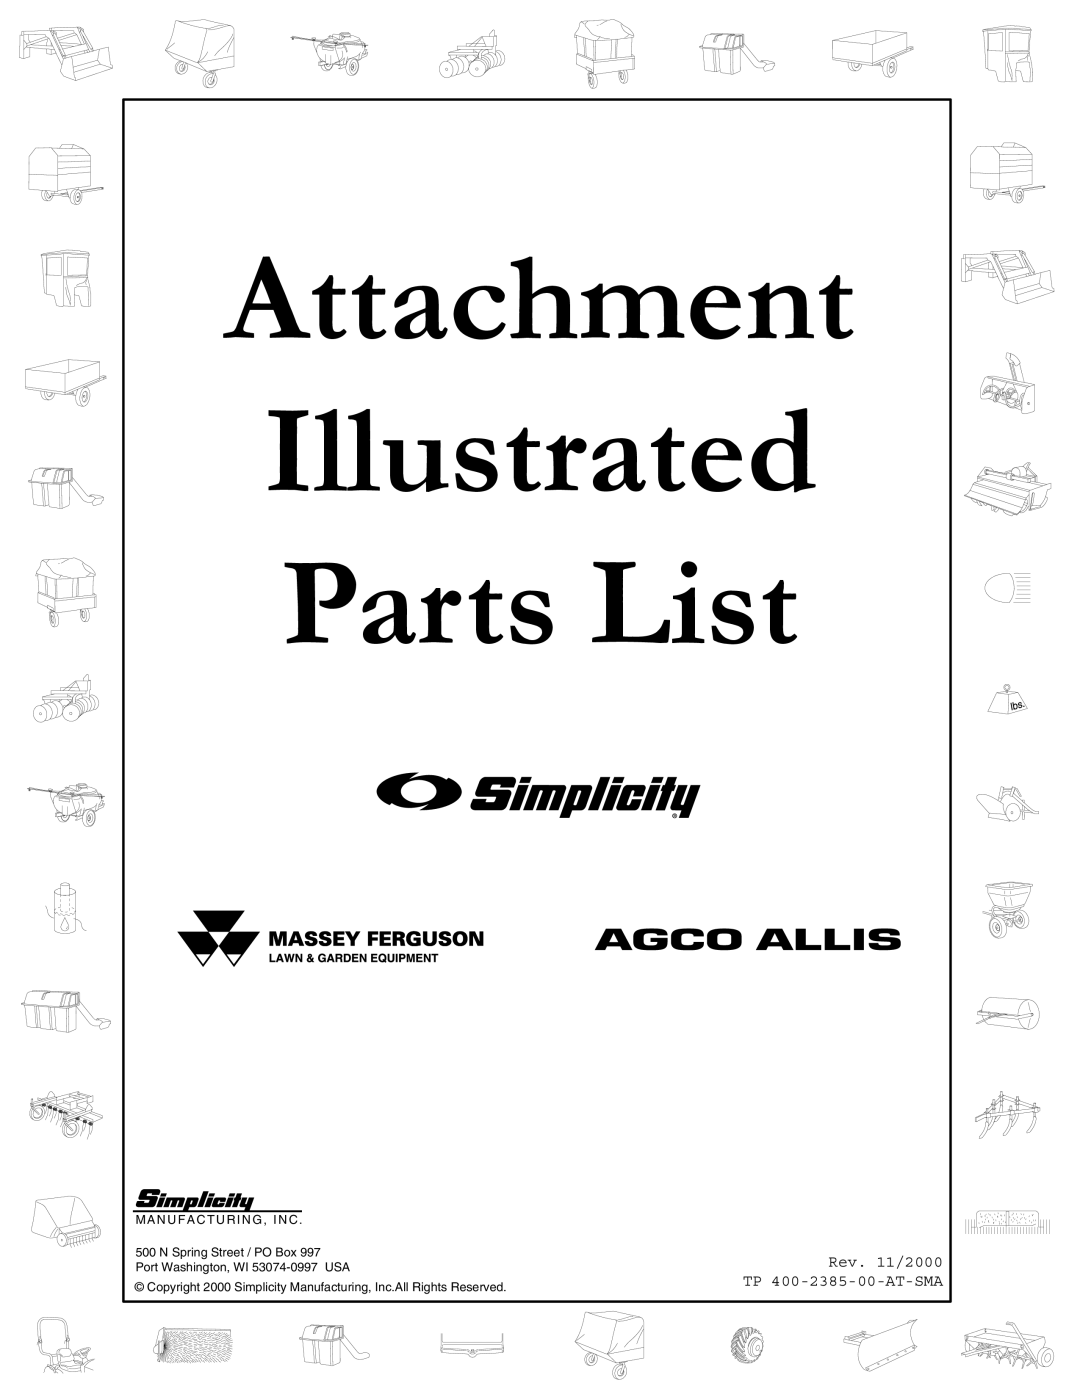 Snapper manual Attachment Illustrated Parts List, Rev. 11/2000 TP 400-2385-00-AT-SMA 